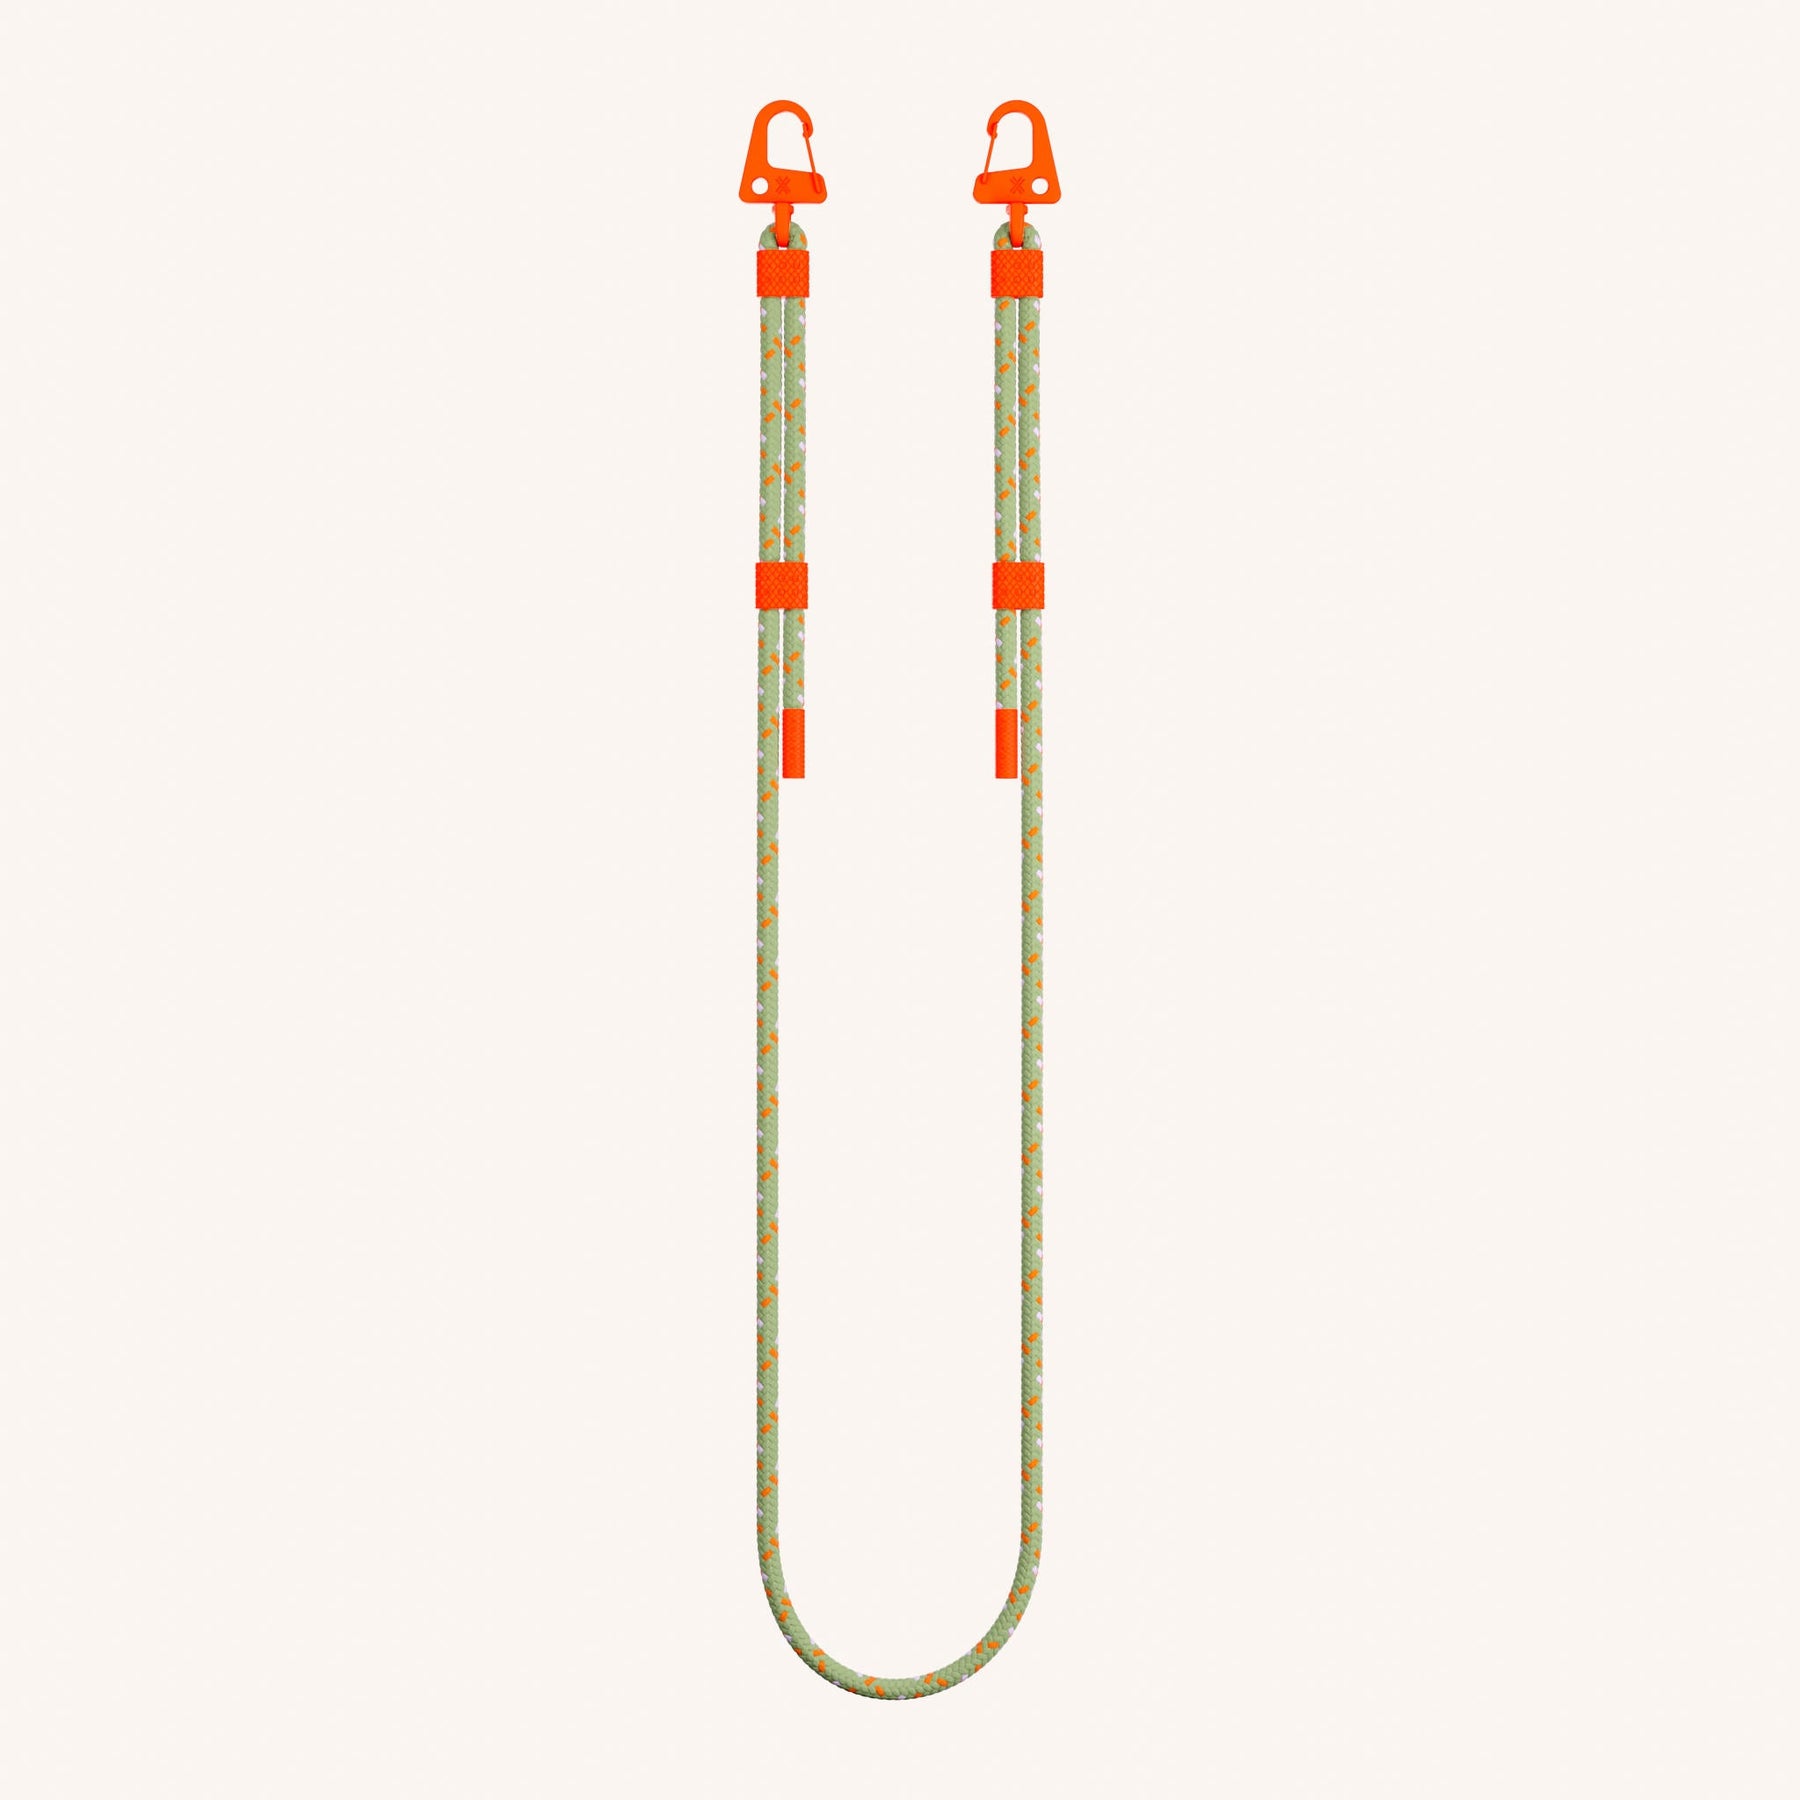 Phone Strap Carabiner Rope in Orange Camouflage Total View | XOUXOU